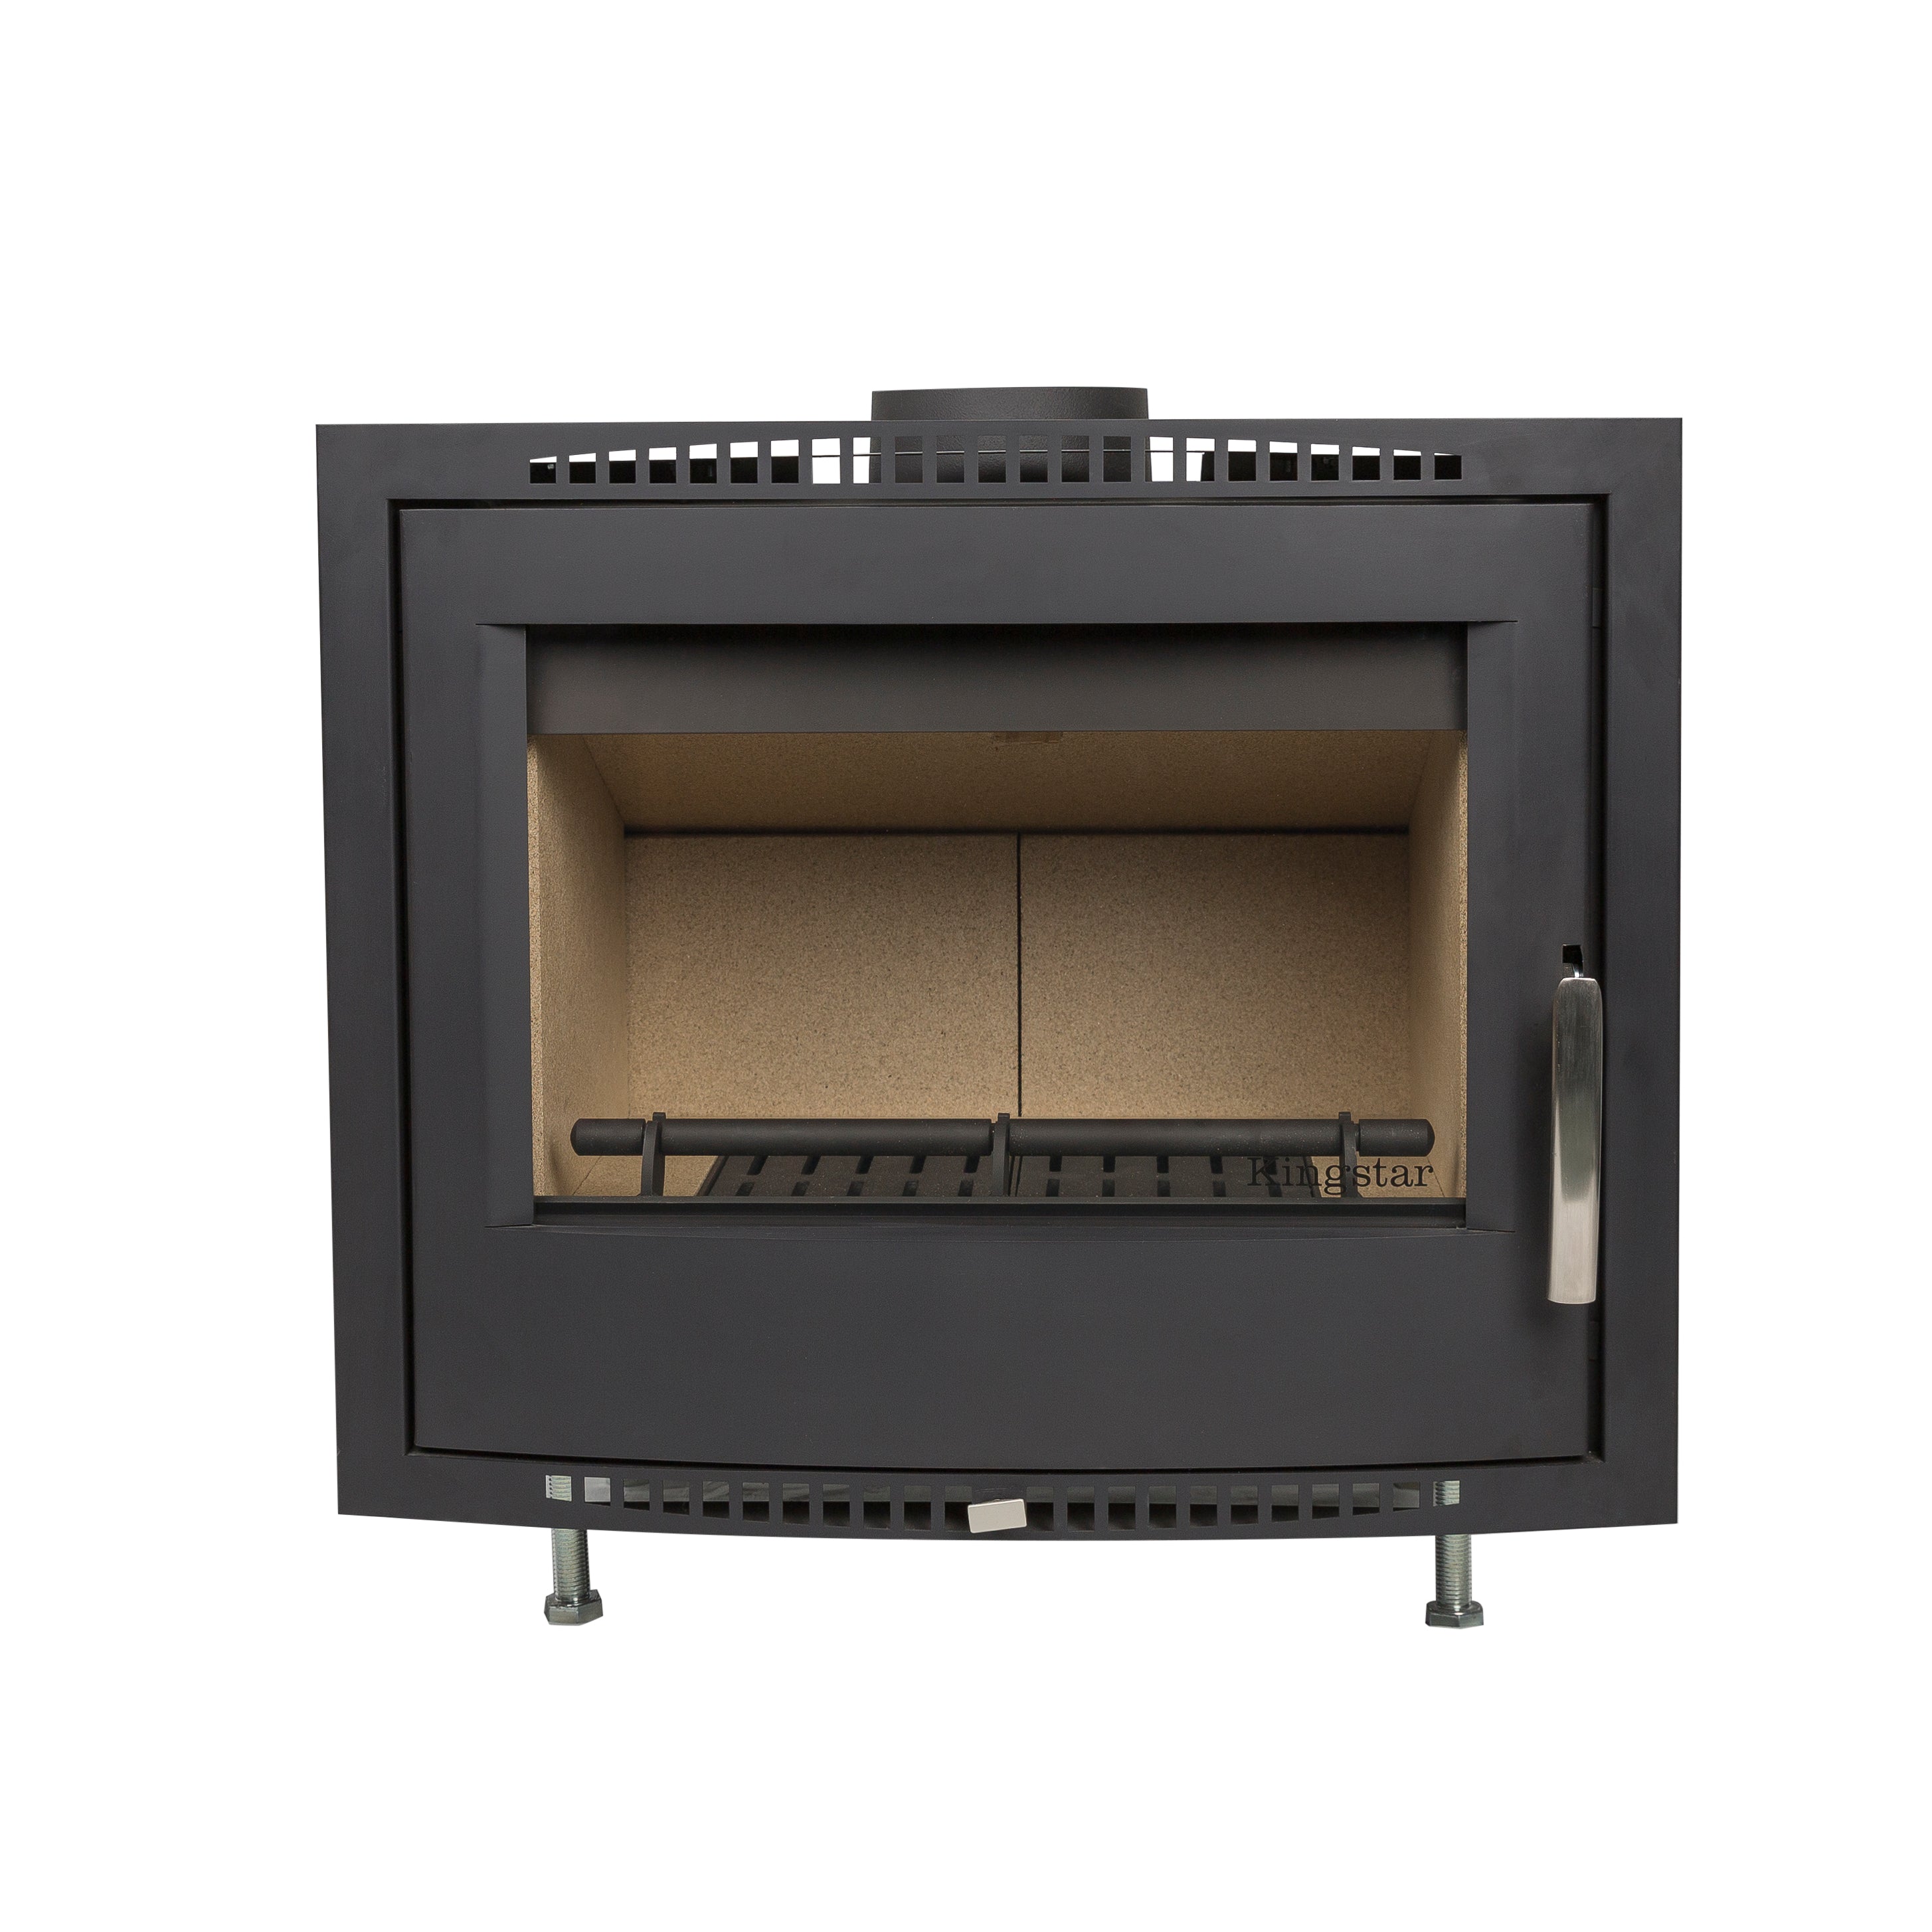 Shannon Passive Eco Stove shown with external air, air ducting and modern design.